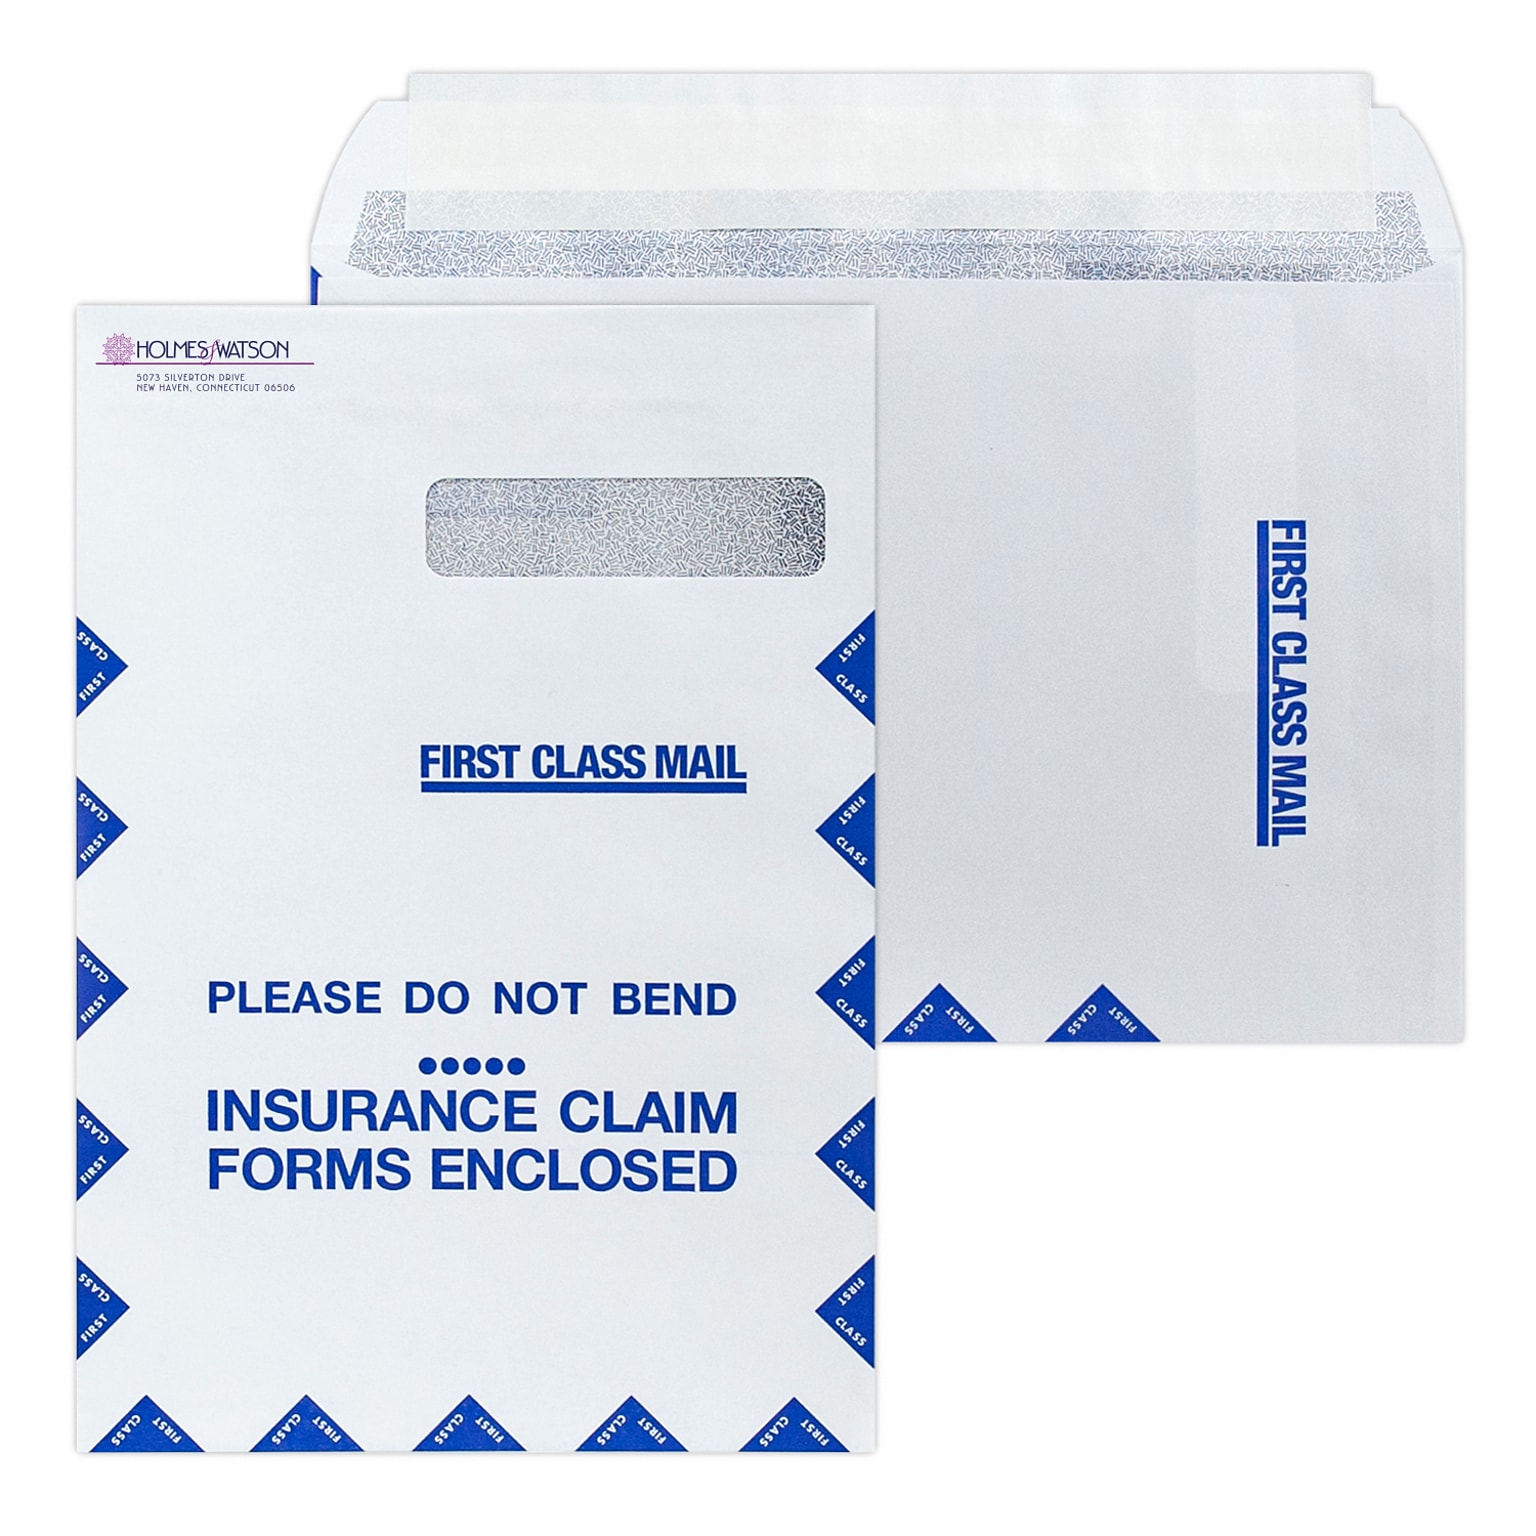 Custom 9 x 13 Resubmission Right Window Self Seal Envelopes with Security Tint, 24# White Wove, 2 Custom Inks, 250 / Pack